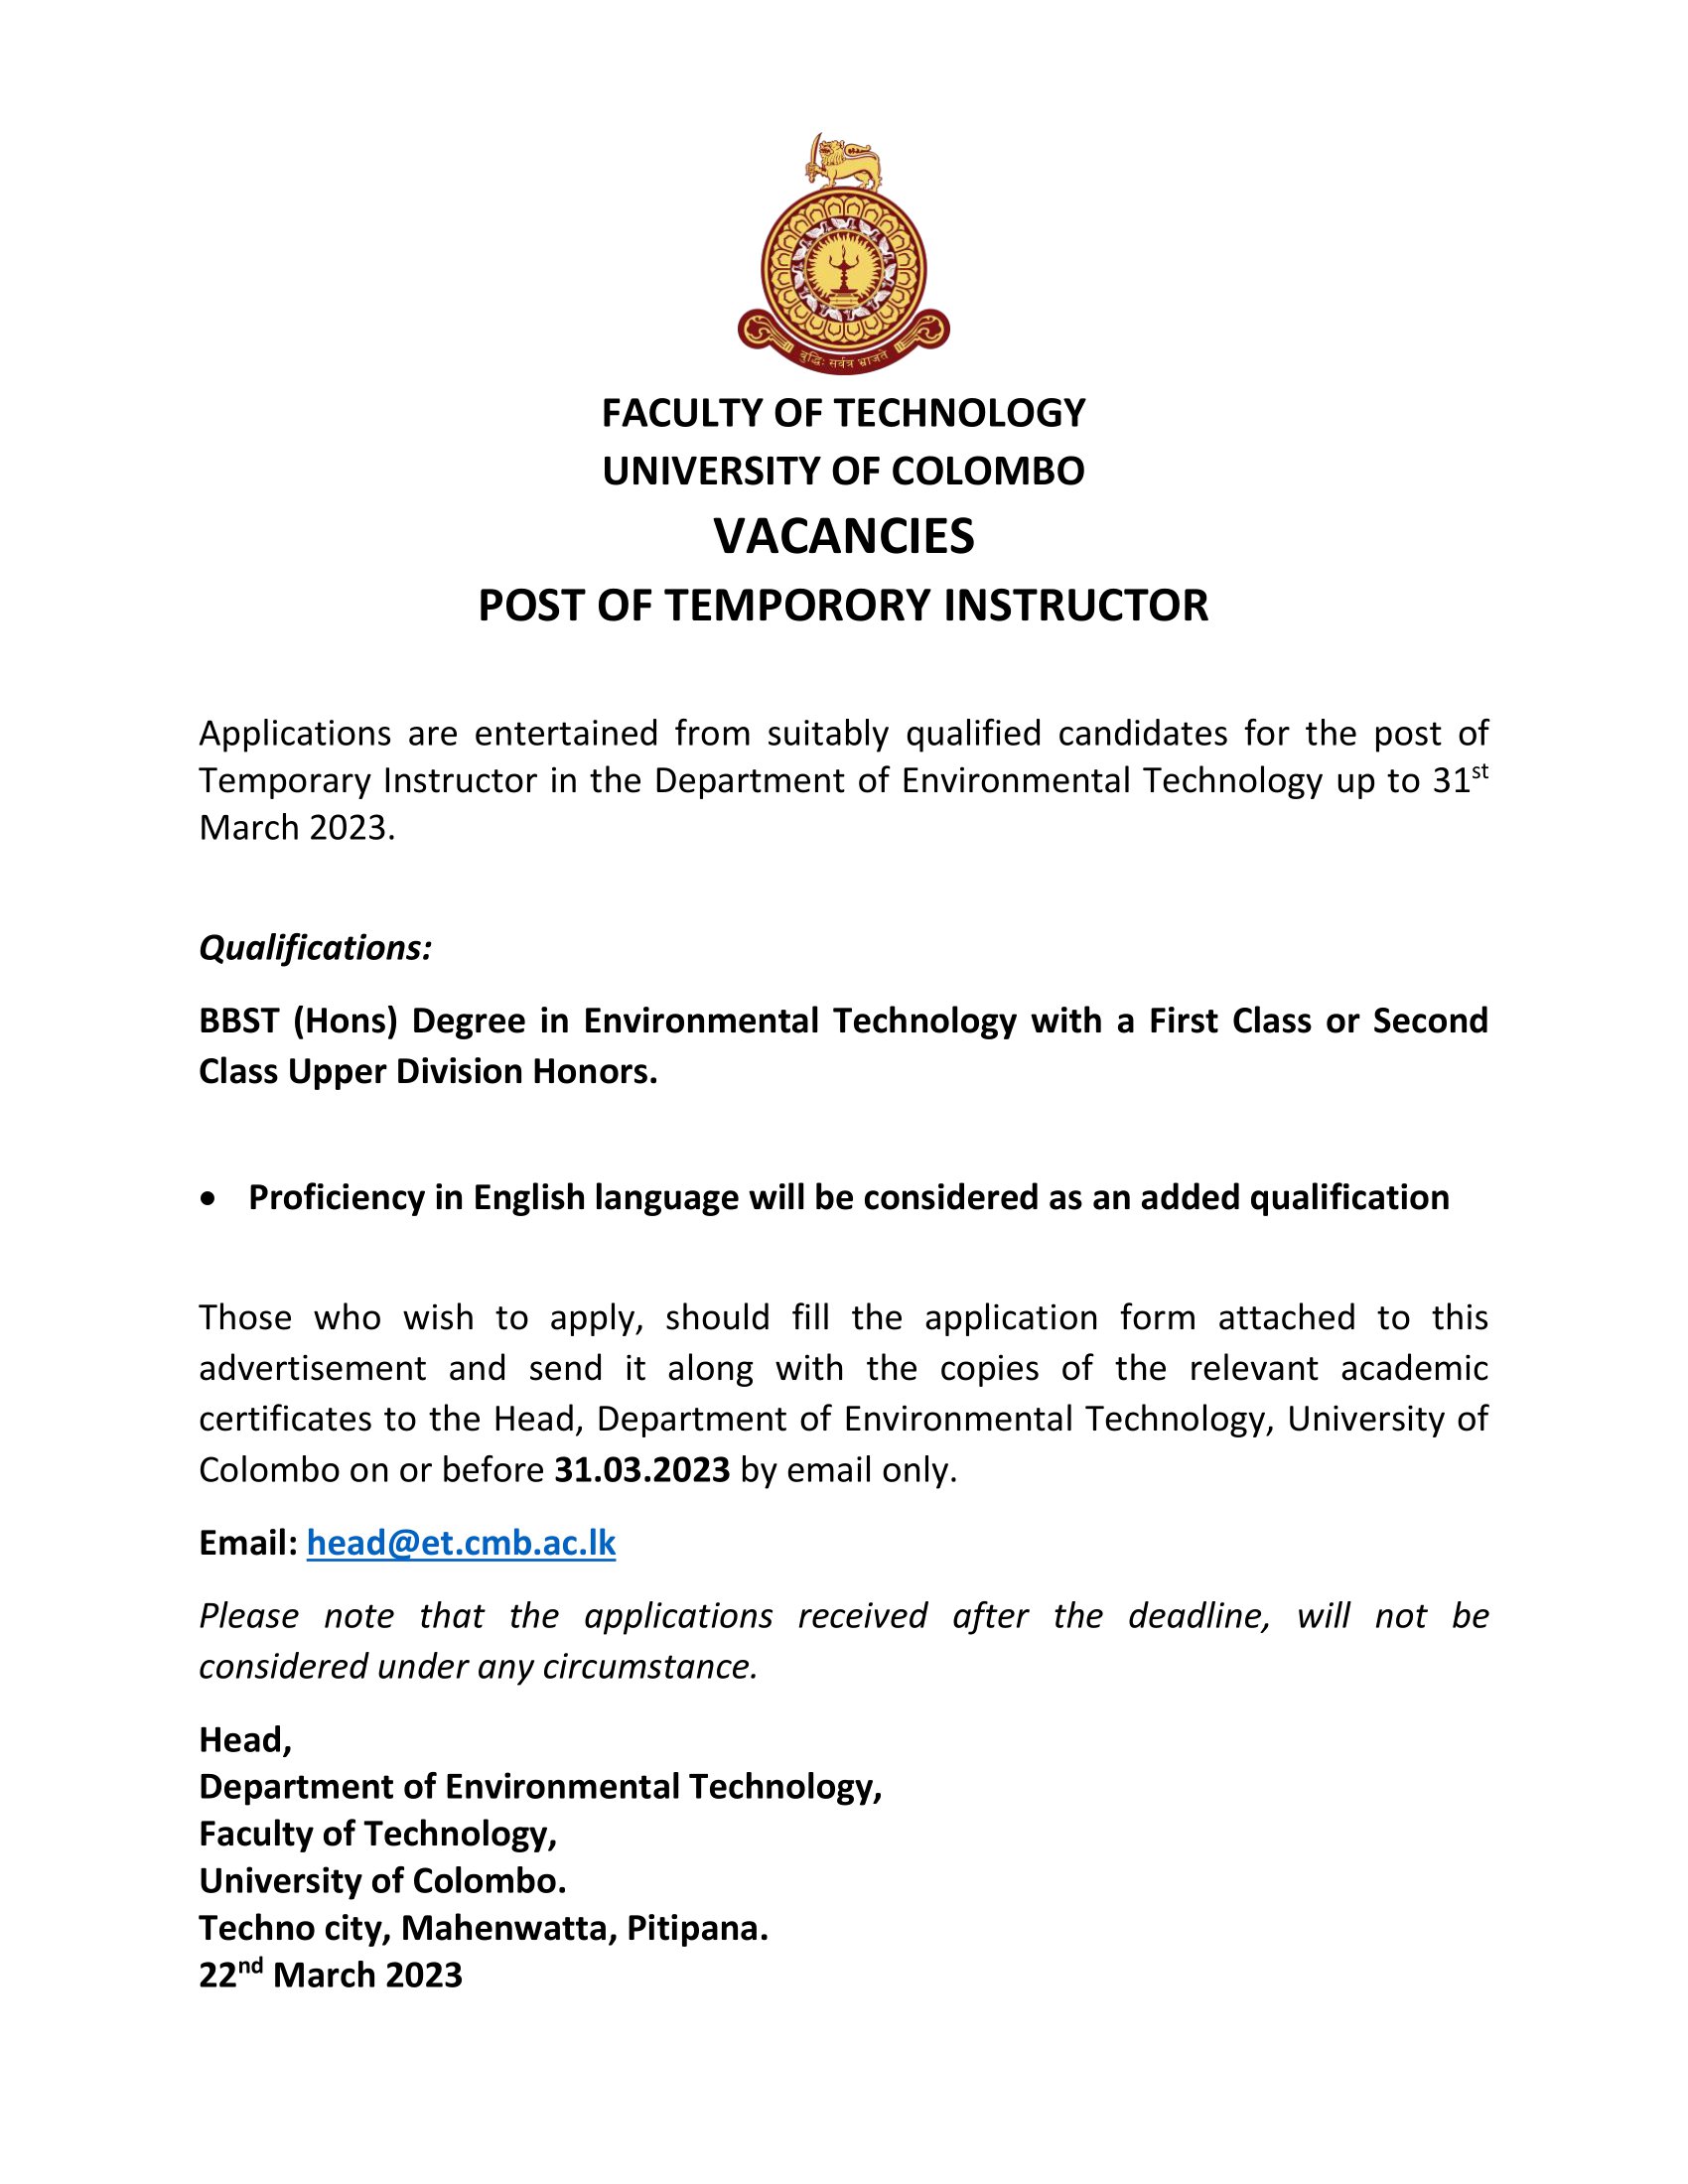 Vacancy for the Post of Temporary Instructor (Department of Environmental Technology)